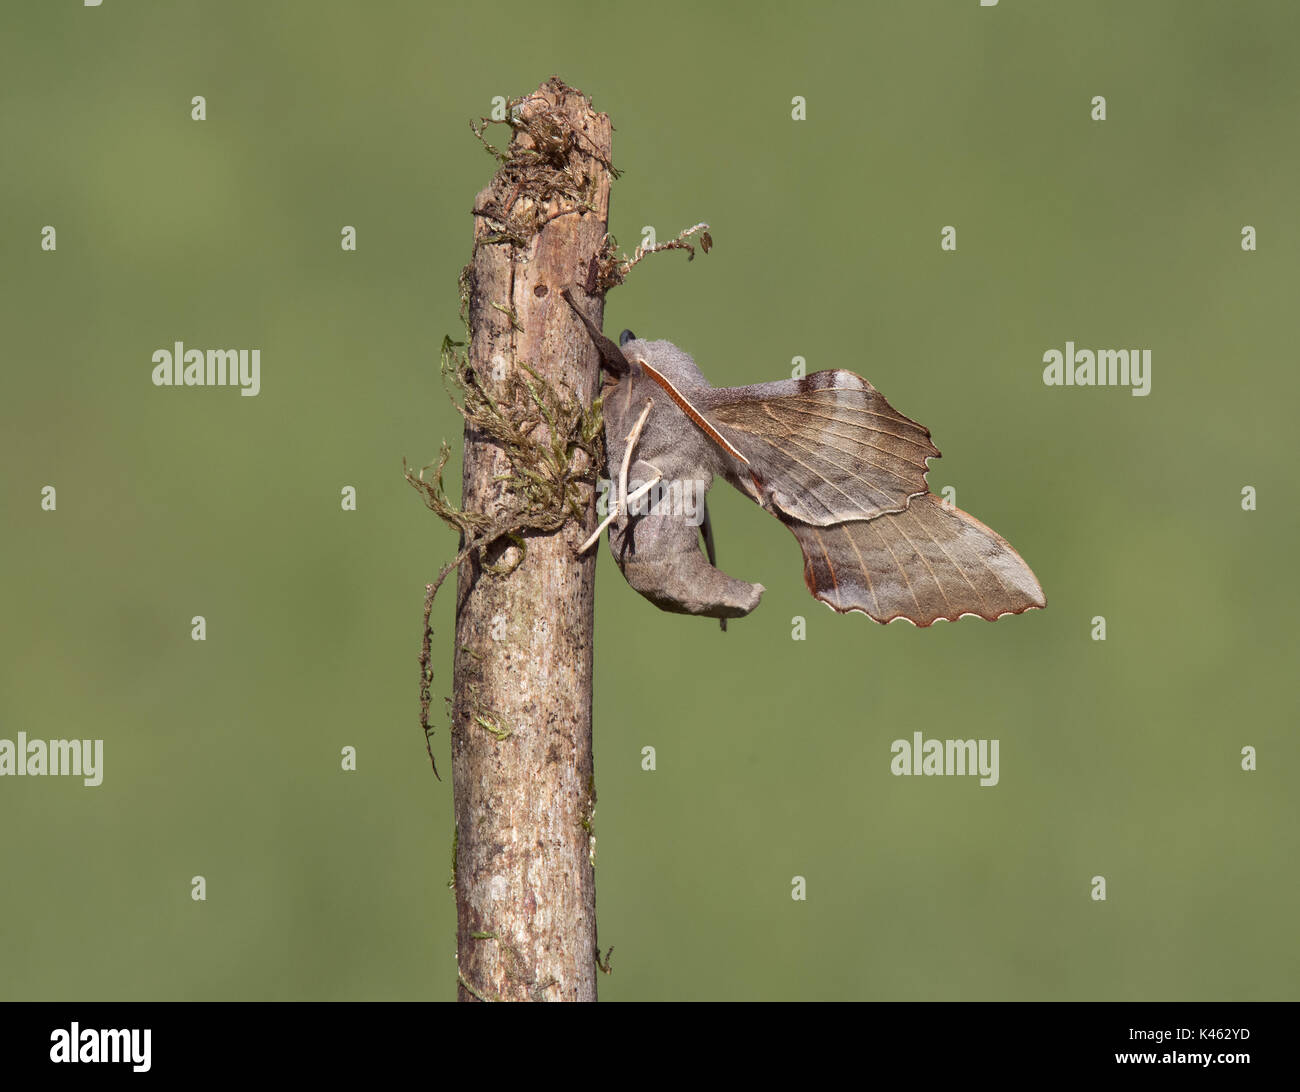 side view of a Poplar Hawk-moth, Laothoe populi, on stick with plain green background Stock Photo